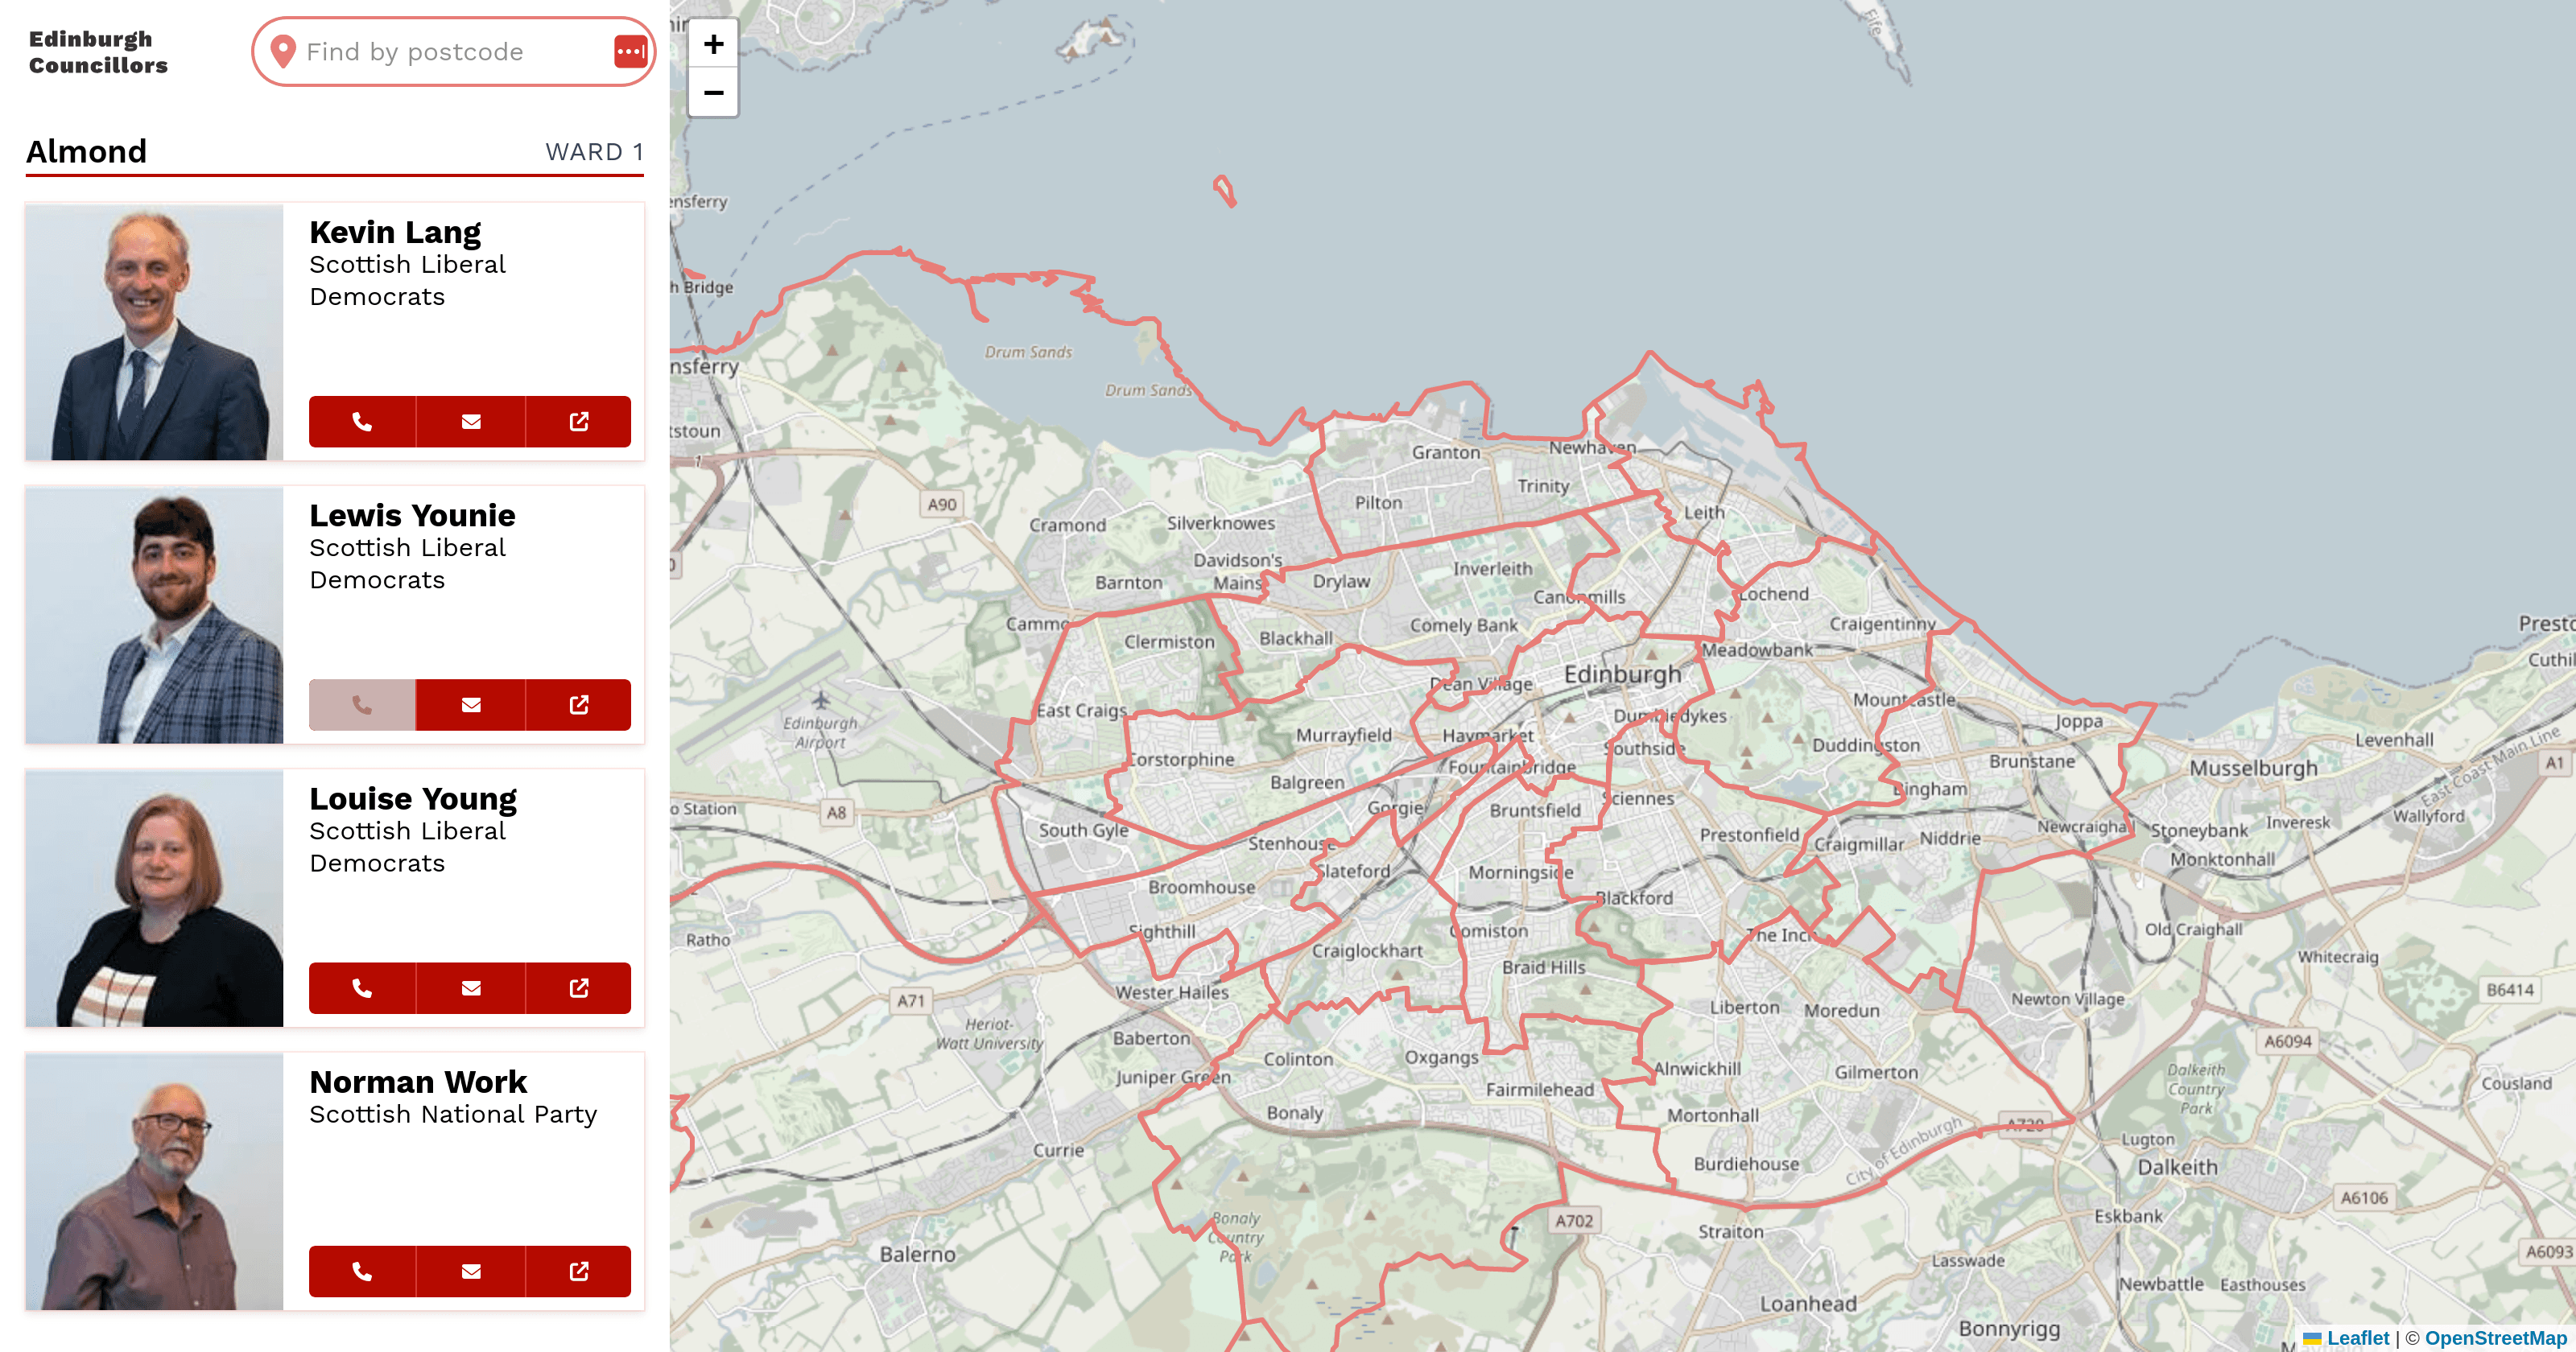 Screenshot of the a map of Edinburgh with details about the city councillors